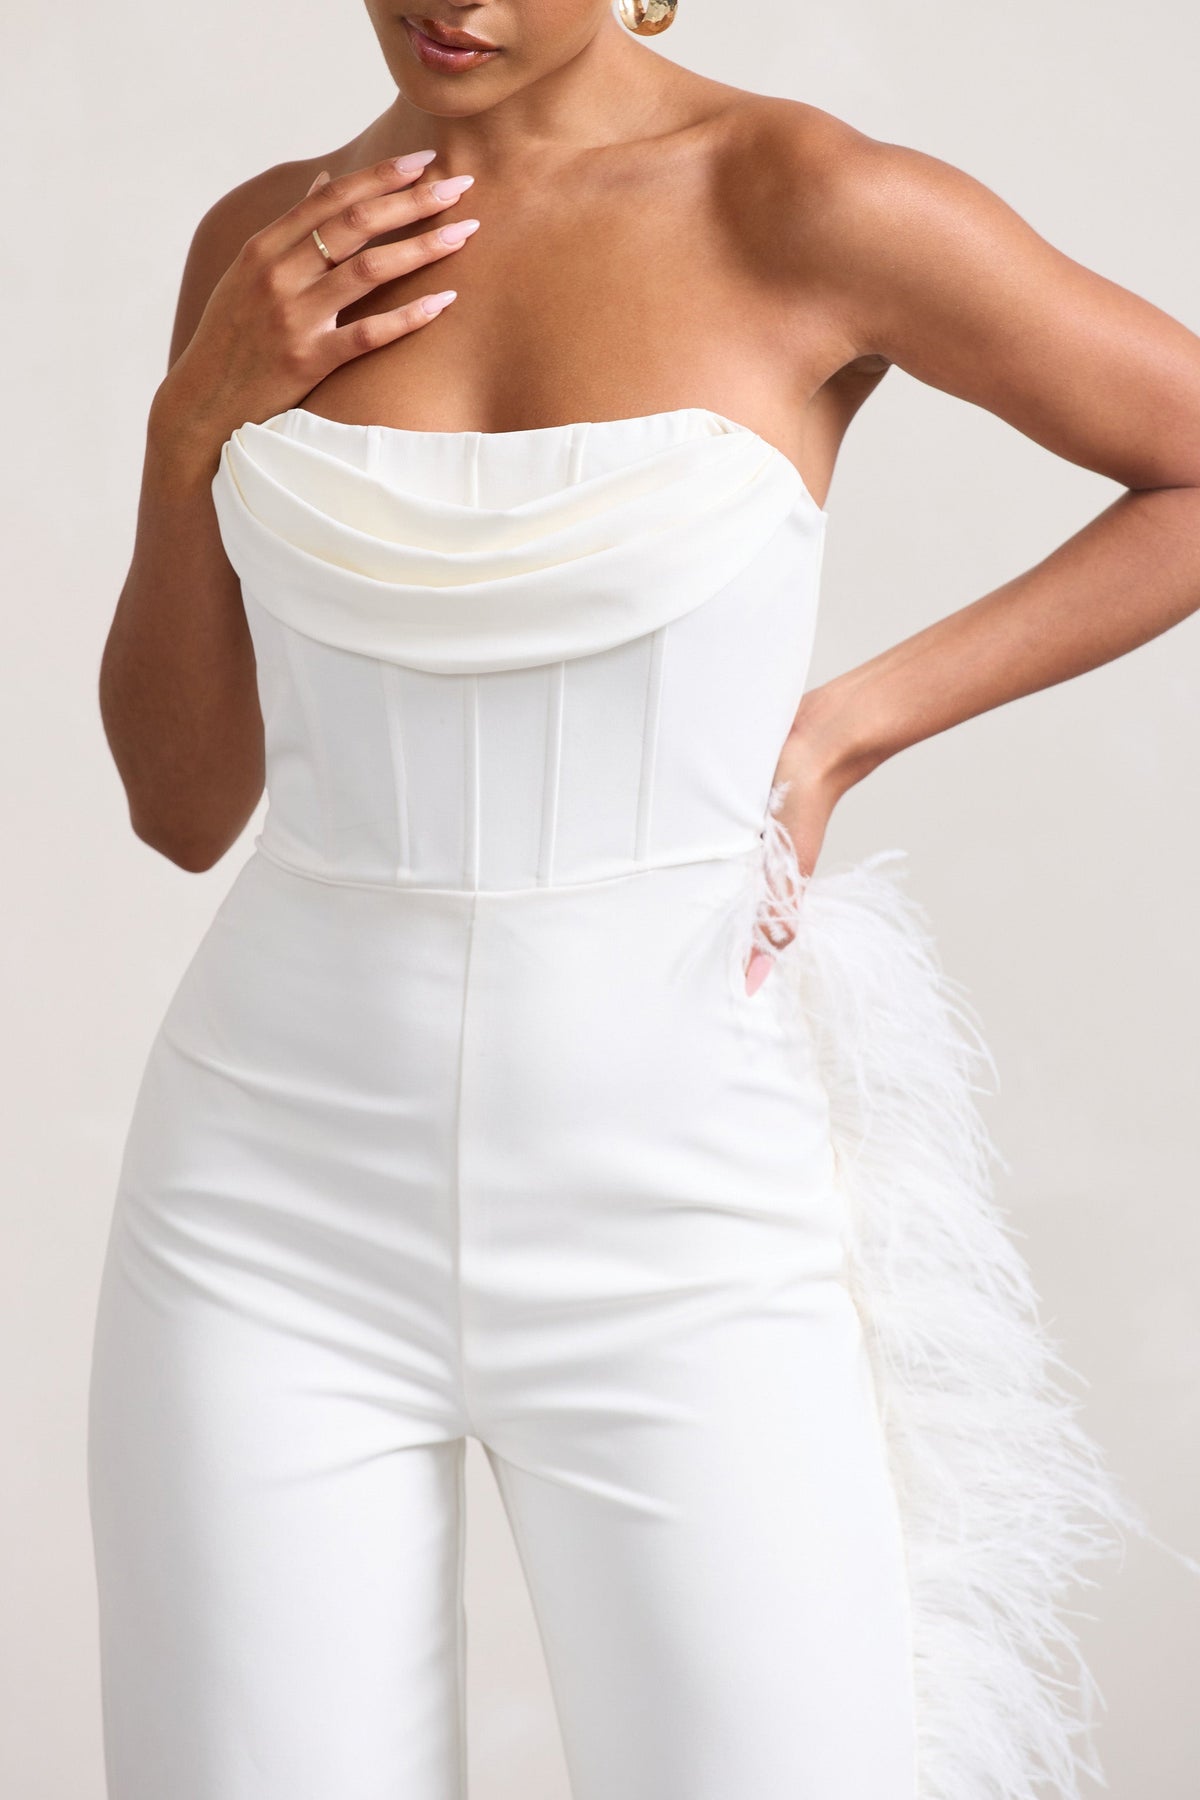 All About You White Feather Bandeau Corset Top – Club L London - IRE